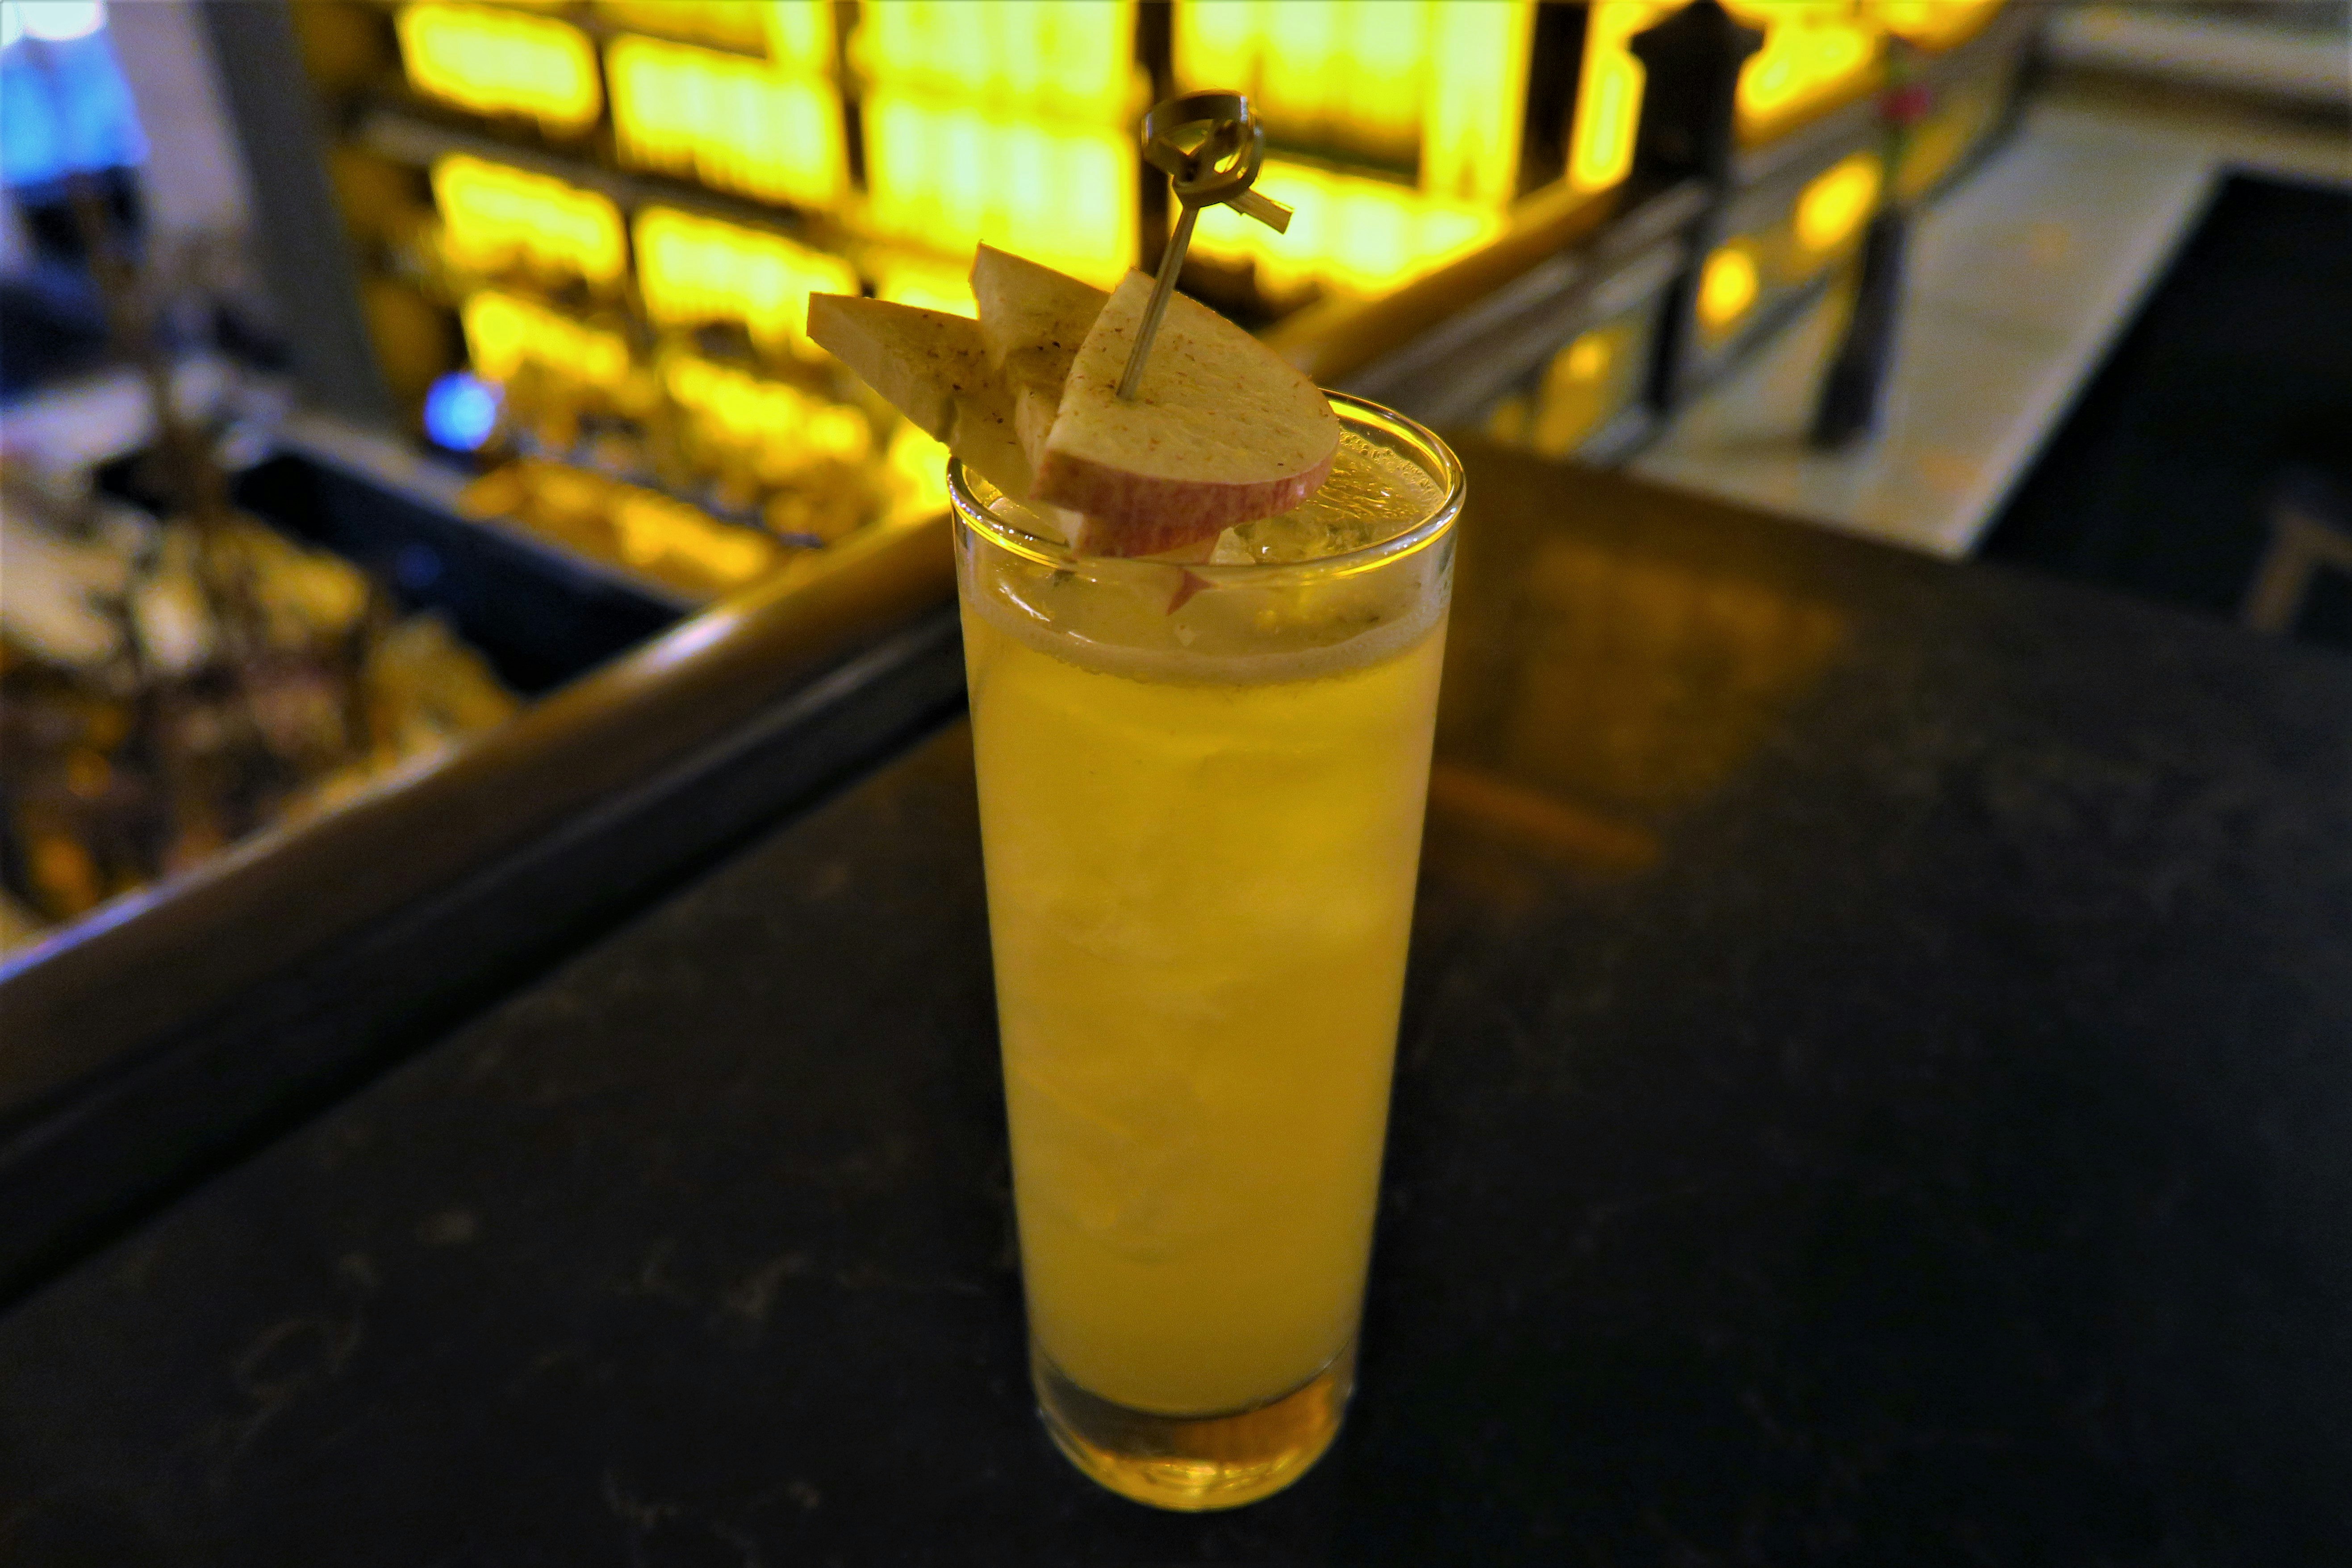 A yellow mocktail in a tall glass has a wooden stirrer and slices of fresh apple.